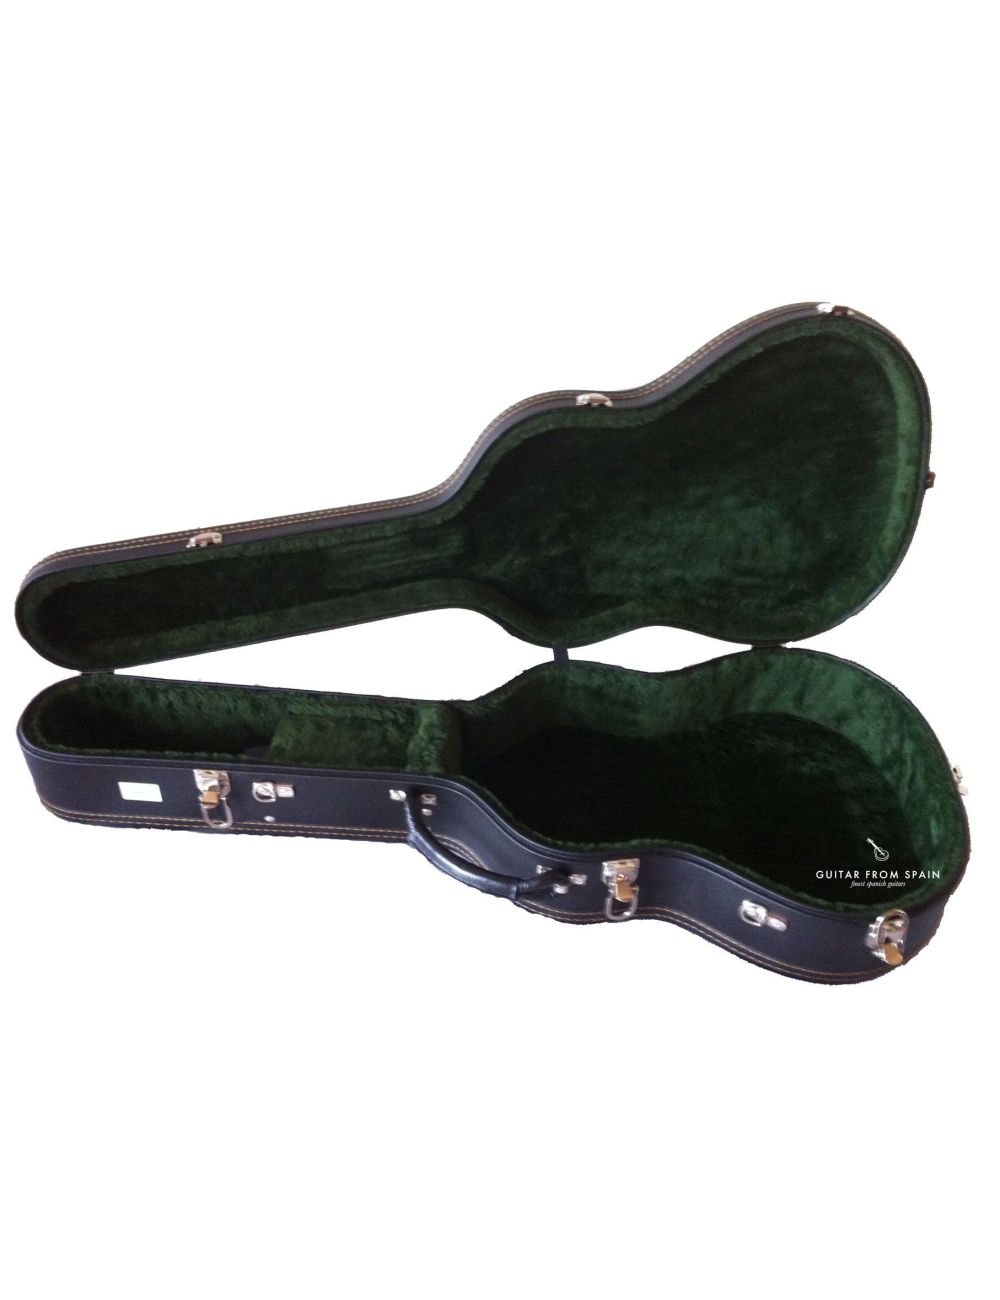 Alhambra 9562 7/8 Classical guitar case 9562 Special sizes